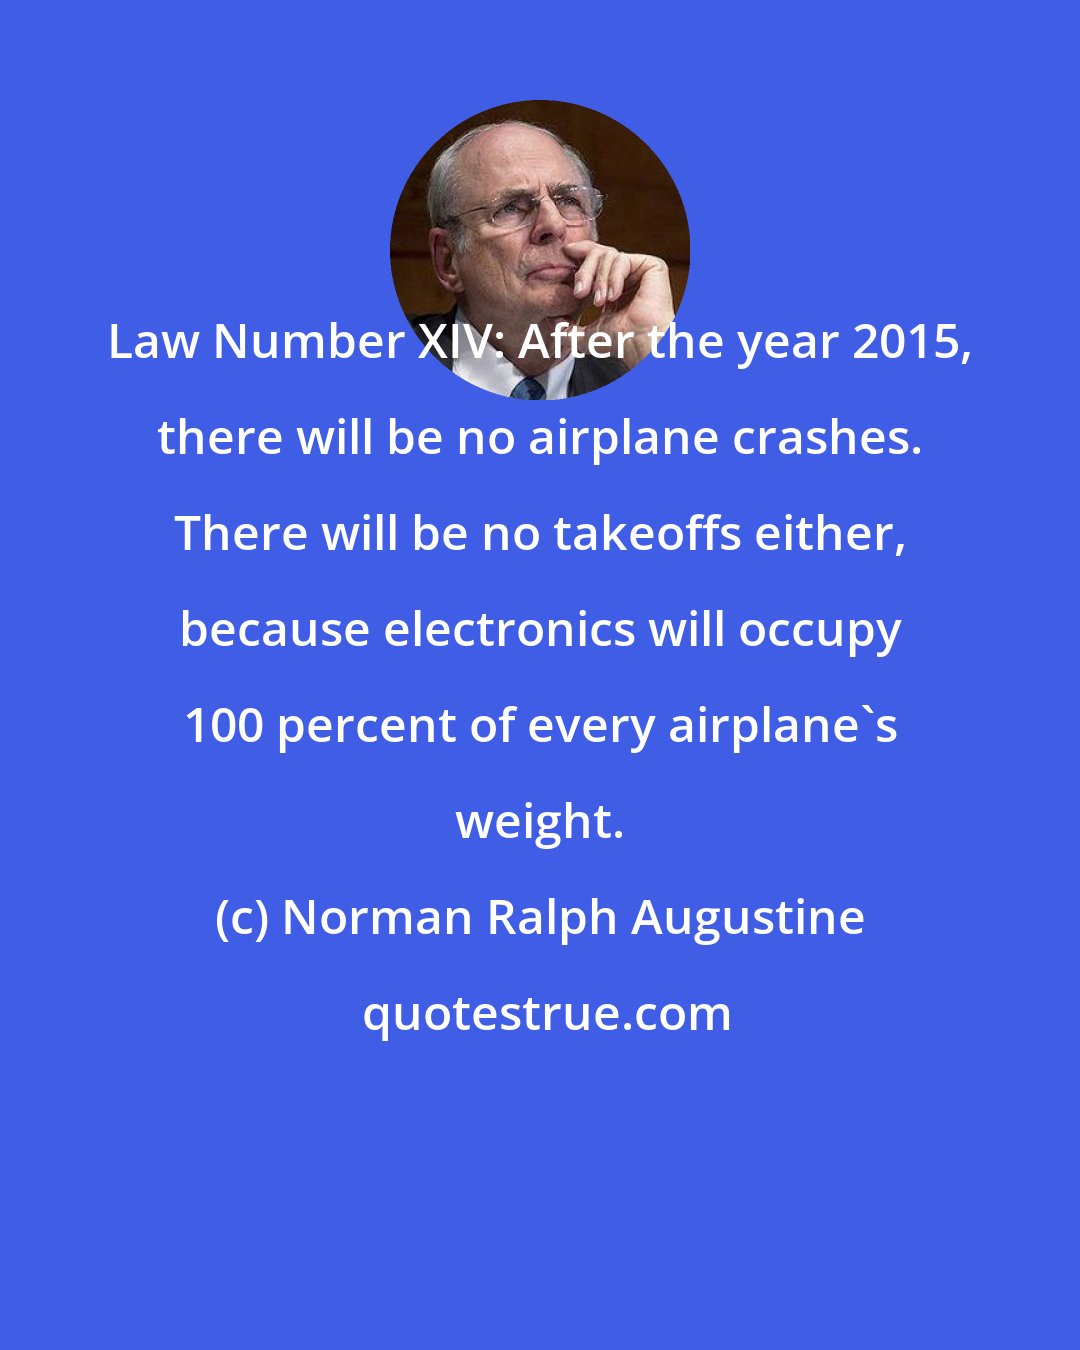 Norman Ralph Augustine: Law Number XIV: After the year 2015, there will be no airplane crashes. There will be no takeoffs either, because electronics will occupy 100 percent of every airplane's weight.